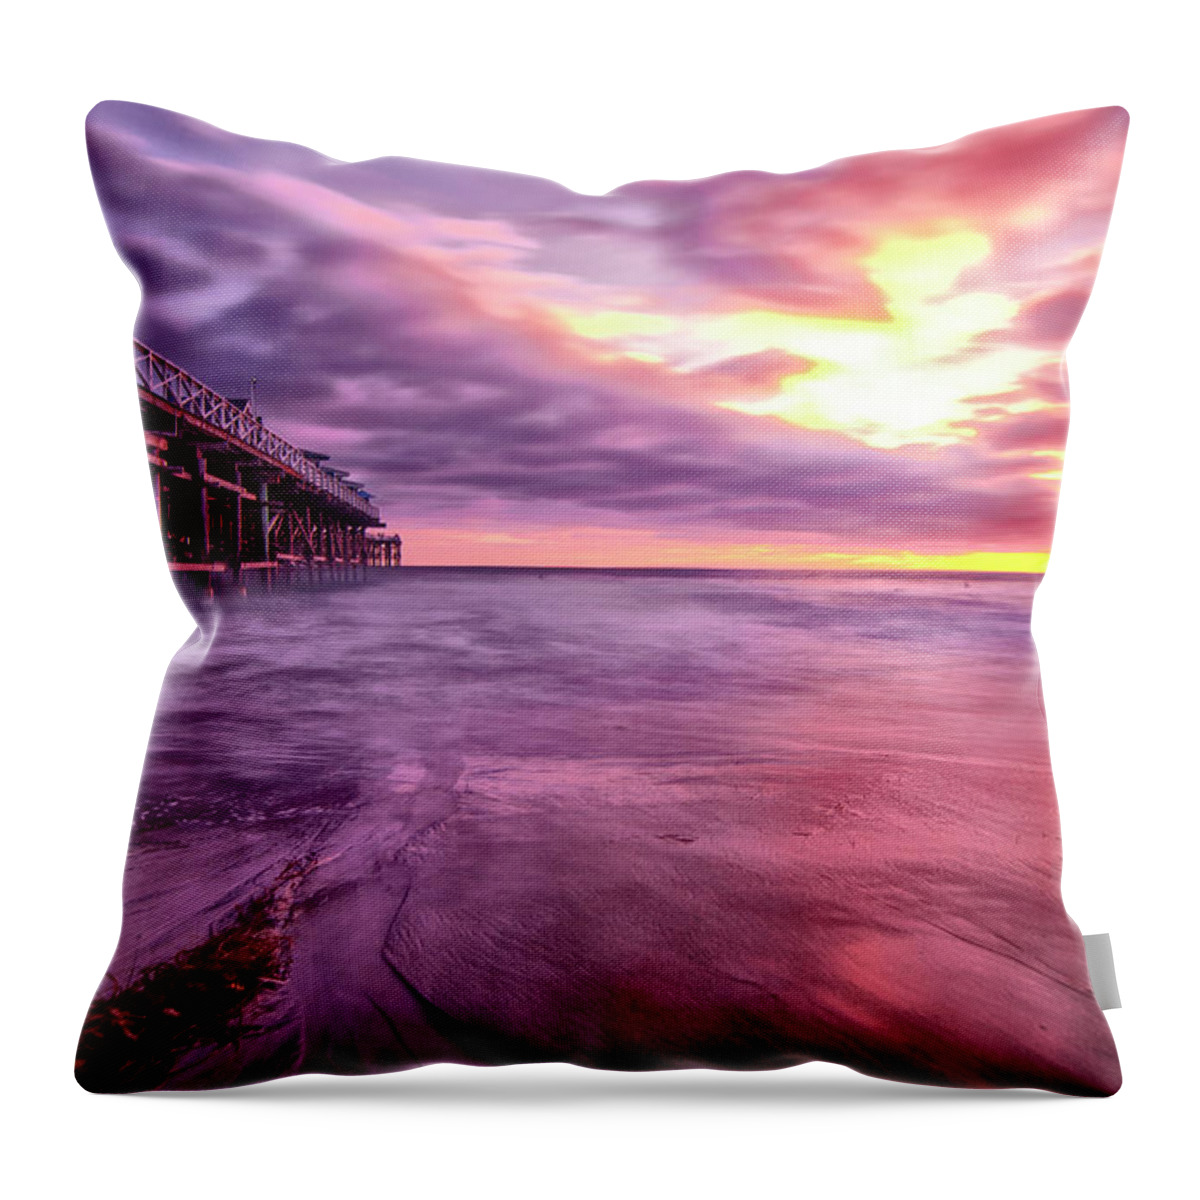 San Diego Throw Pillow featuring the photograph Pacific Beach Pier by Lawrence Knutsson